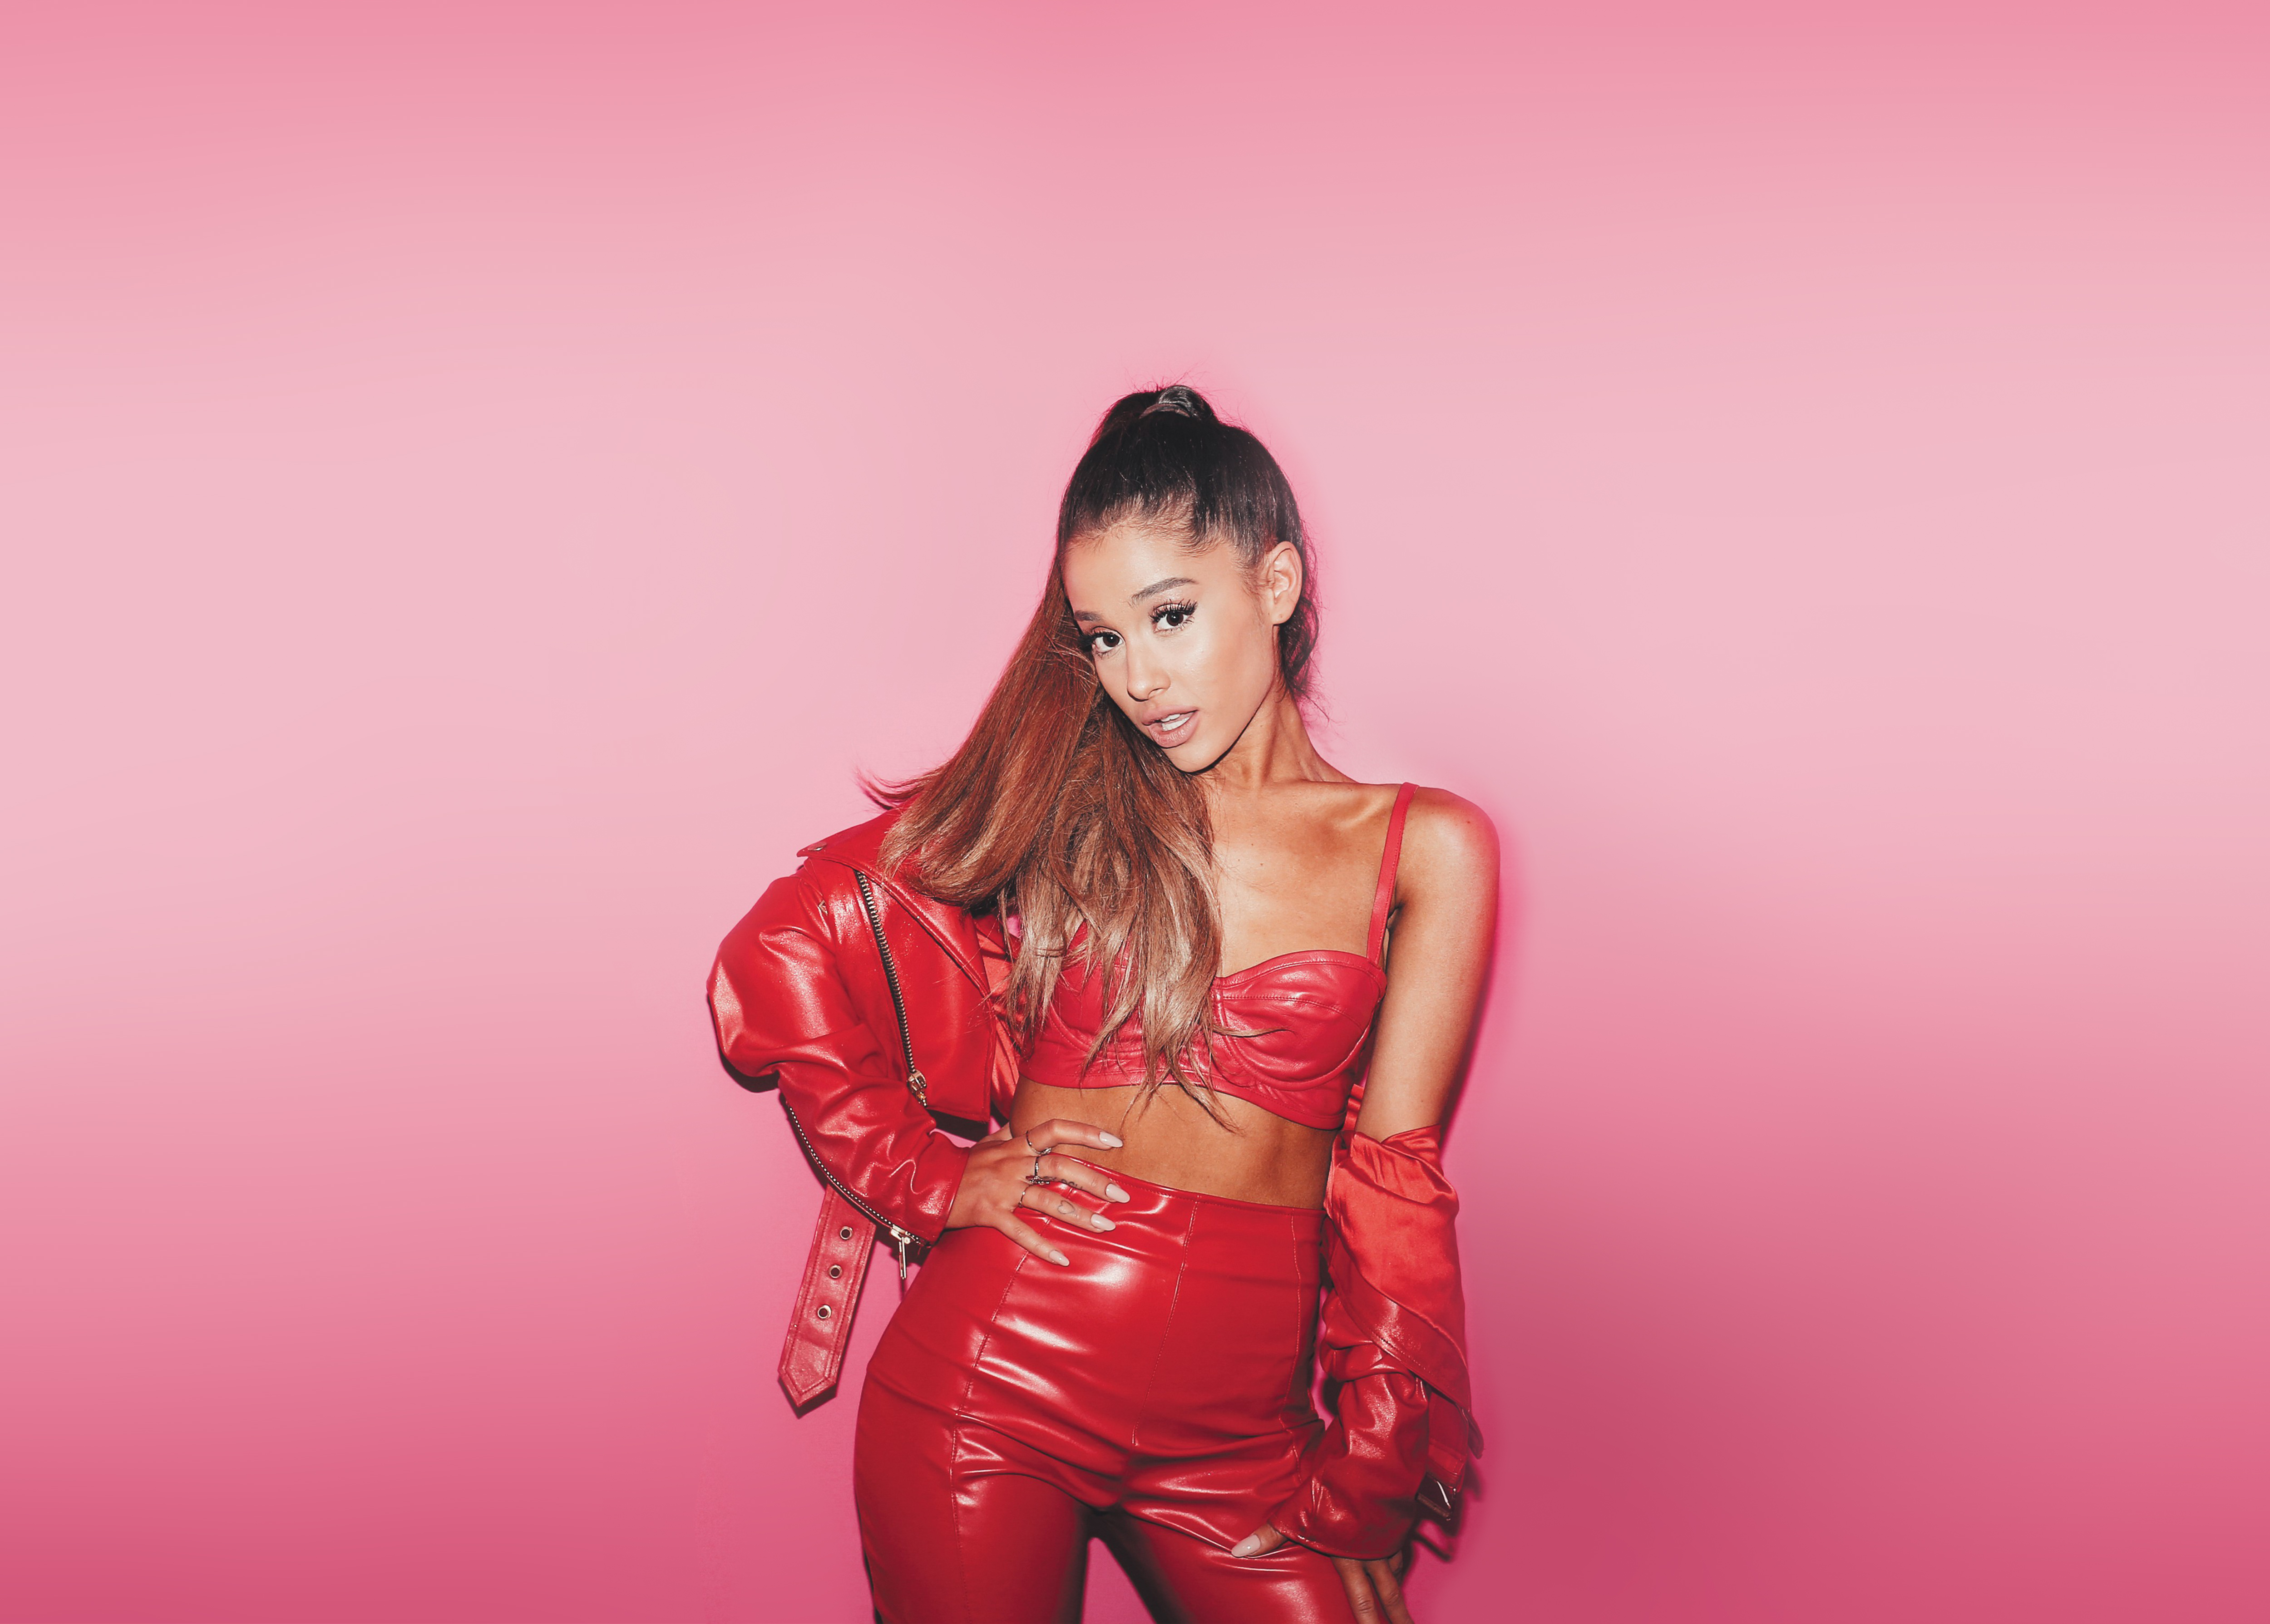 Ariana Grande Wallpaper Gallery Yopriceville High Quality